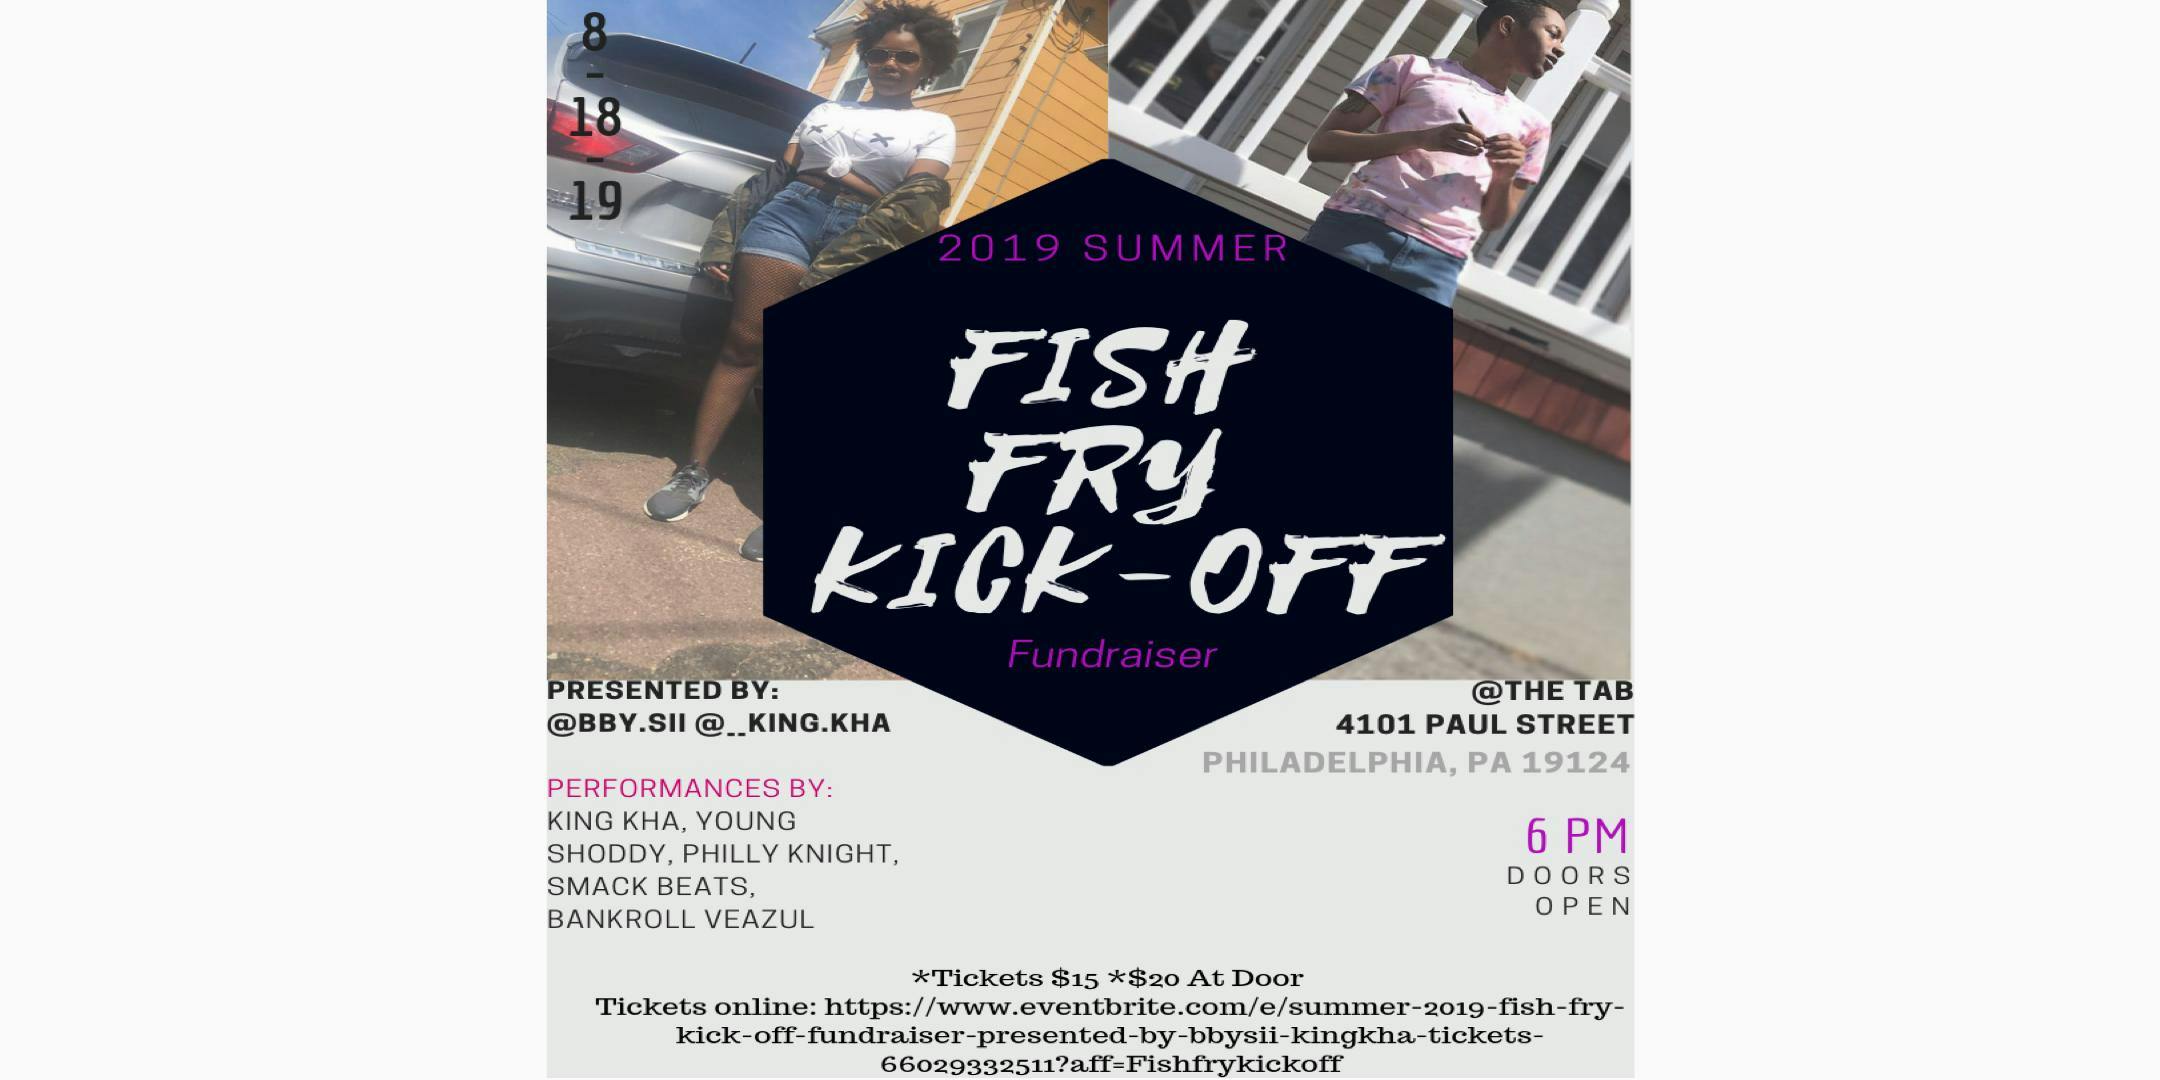 Fish Fry Kick-Off Fundraiser !! Presented by @bby.sii @__king.kha